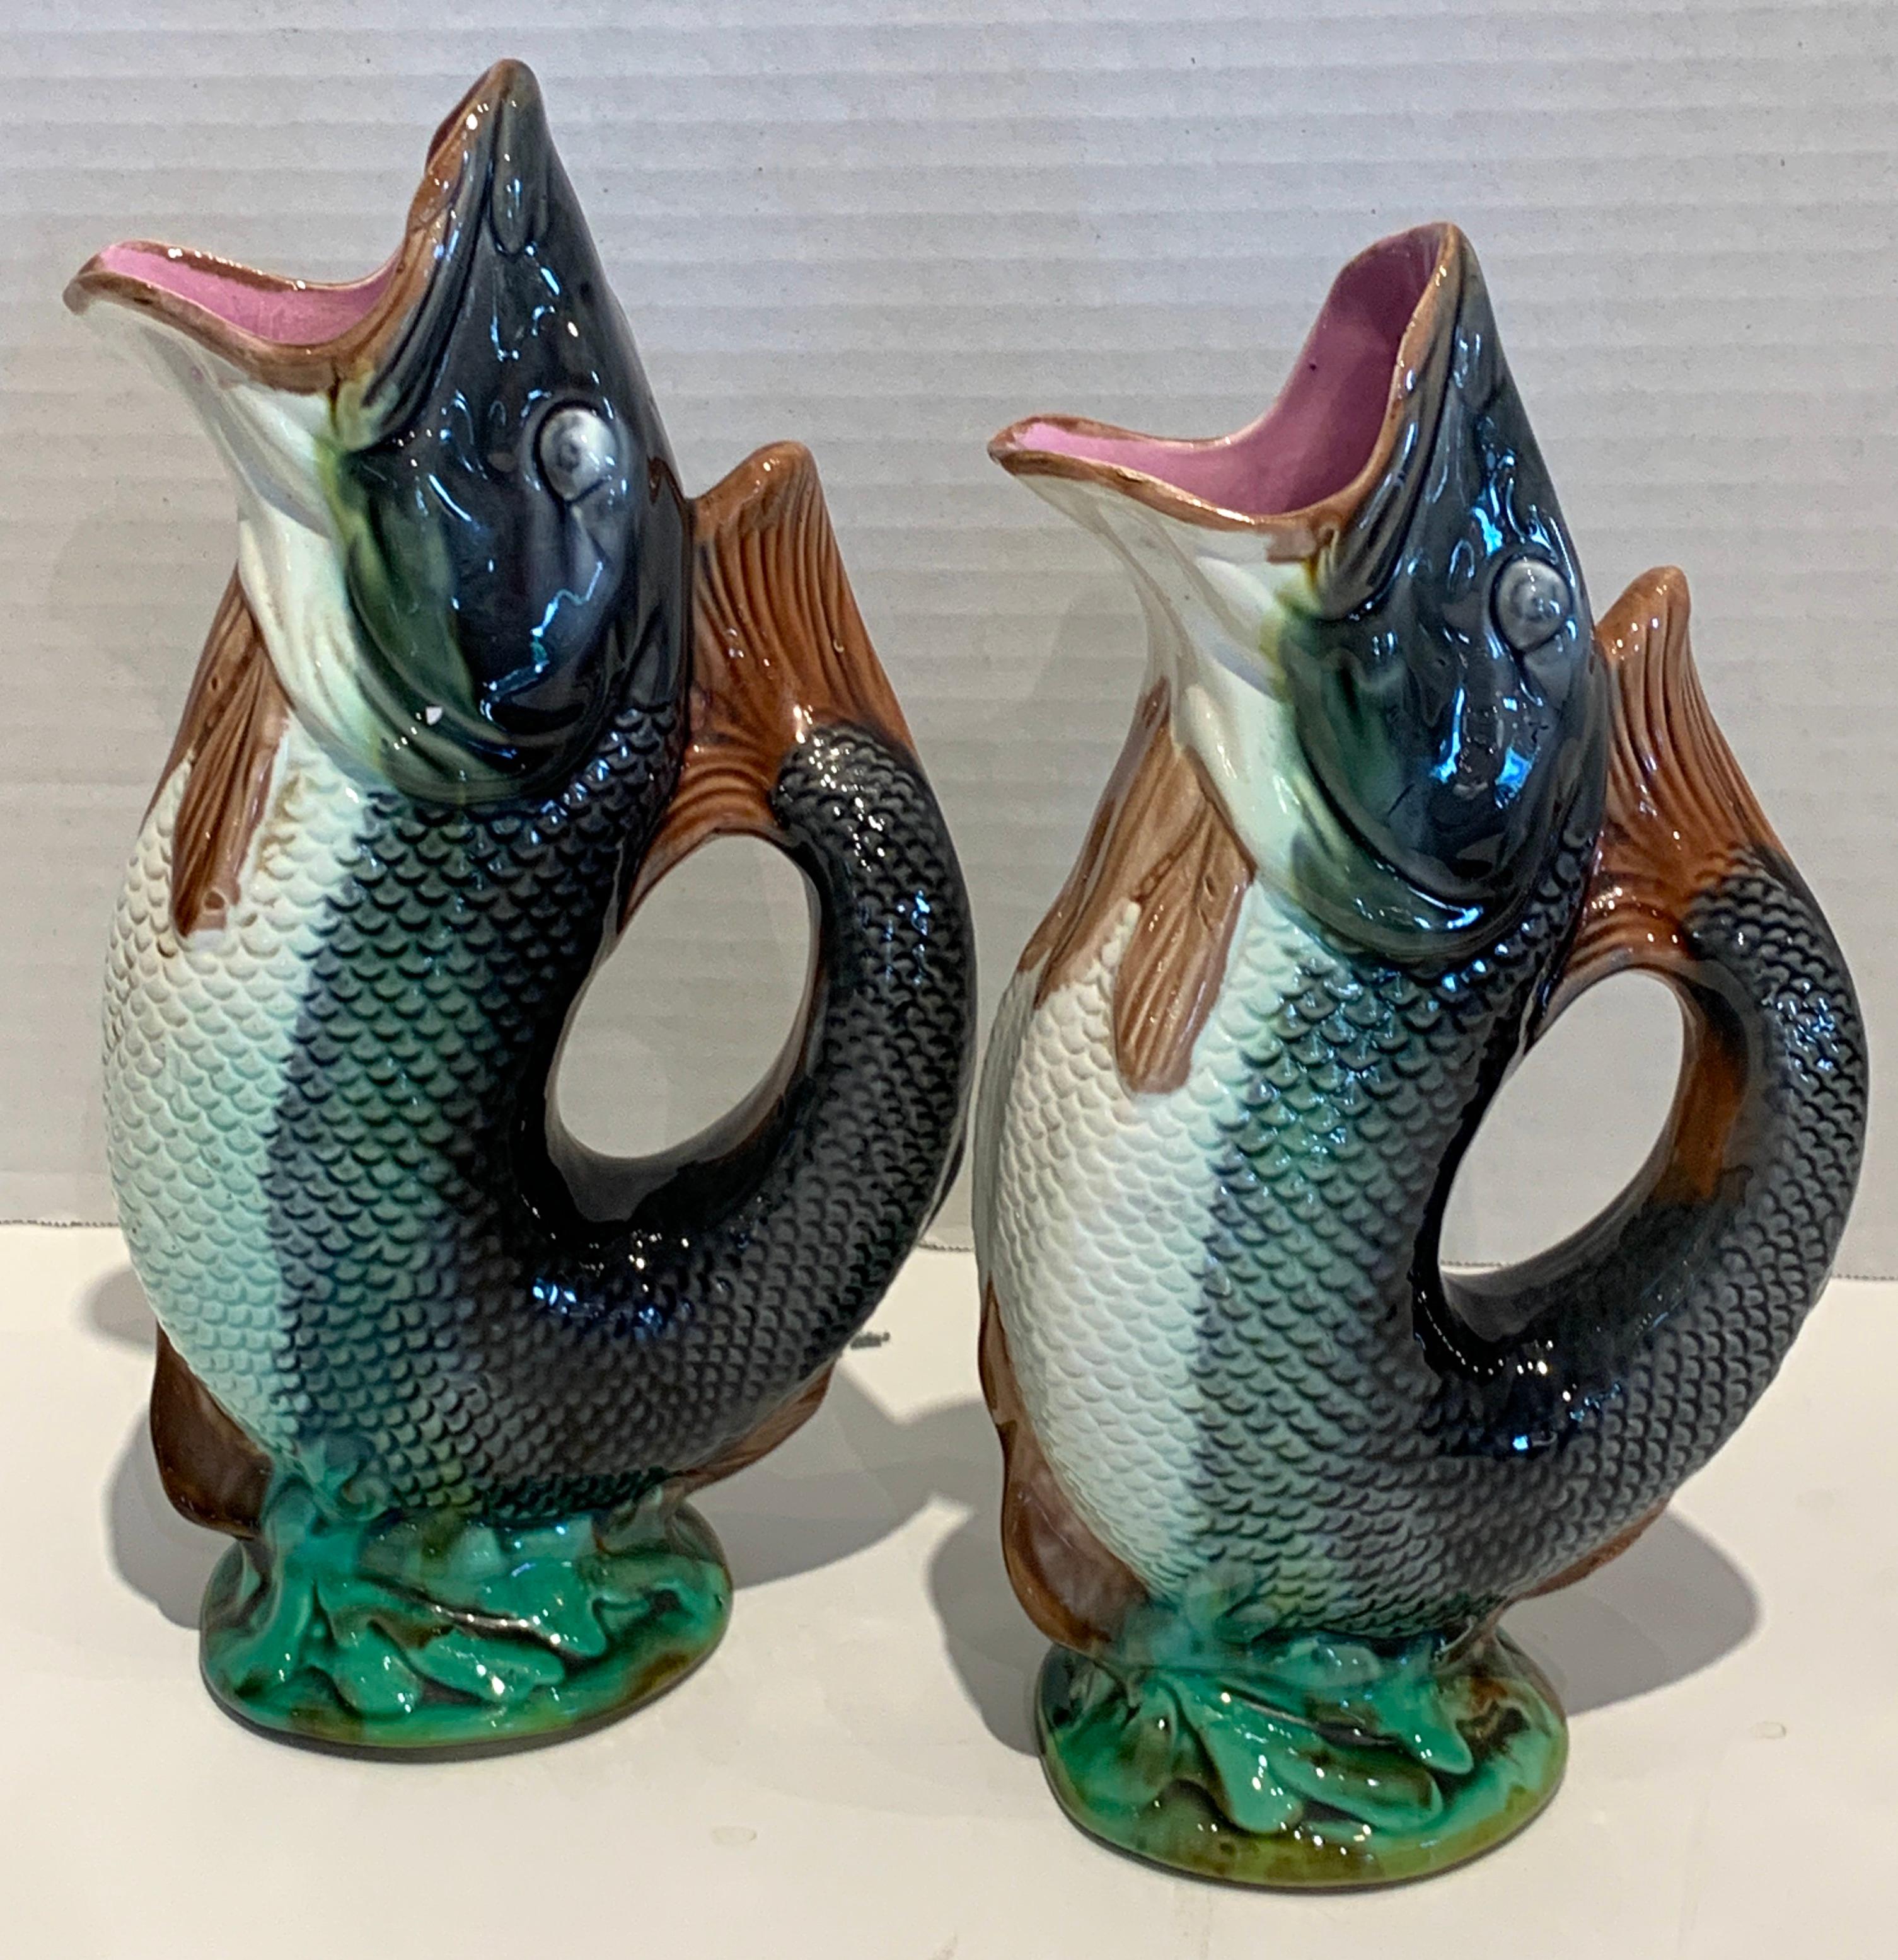 19th Century Five Graduating Majolica Fish Pitchers, by Adams & Bromley